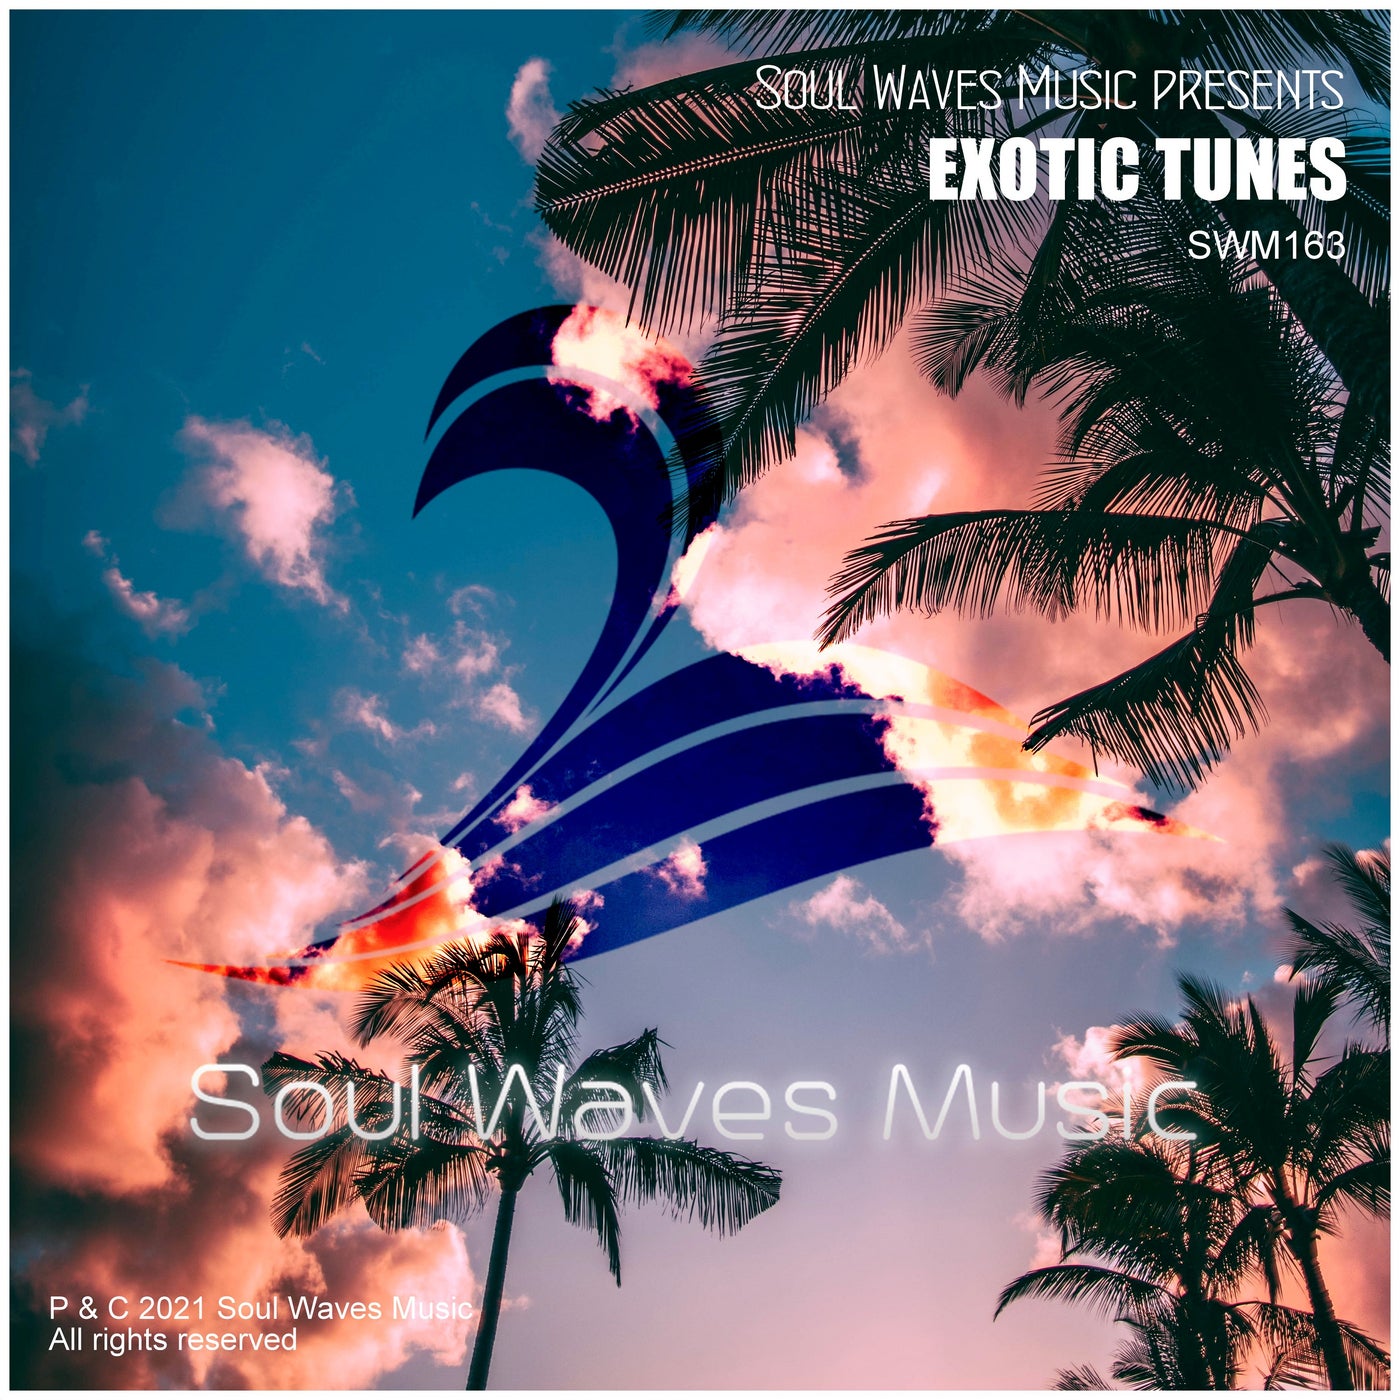 Soul Waves Music pres. Exotic Tunes